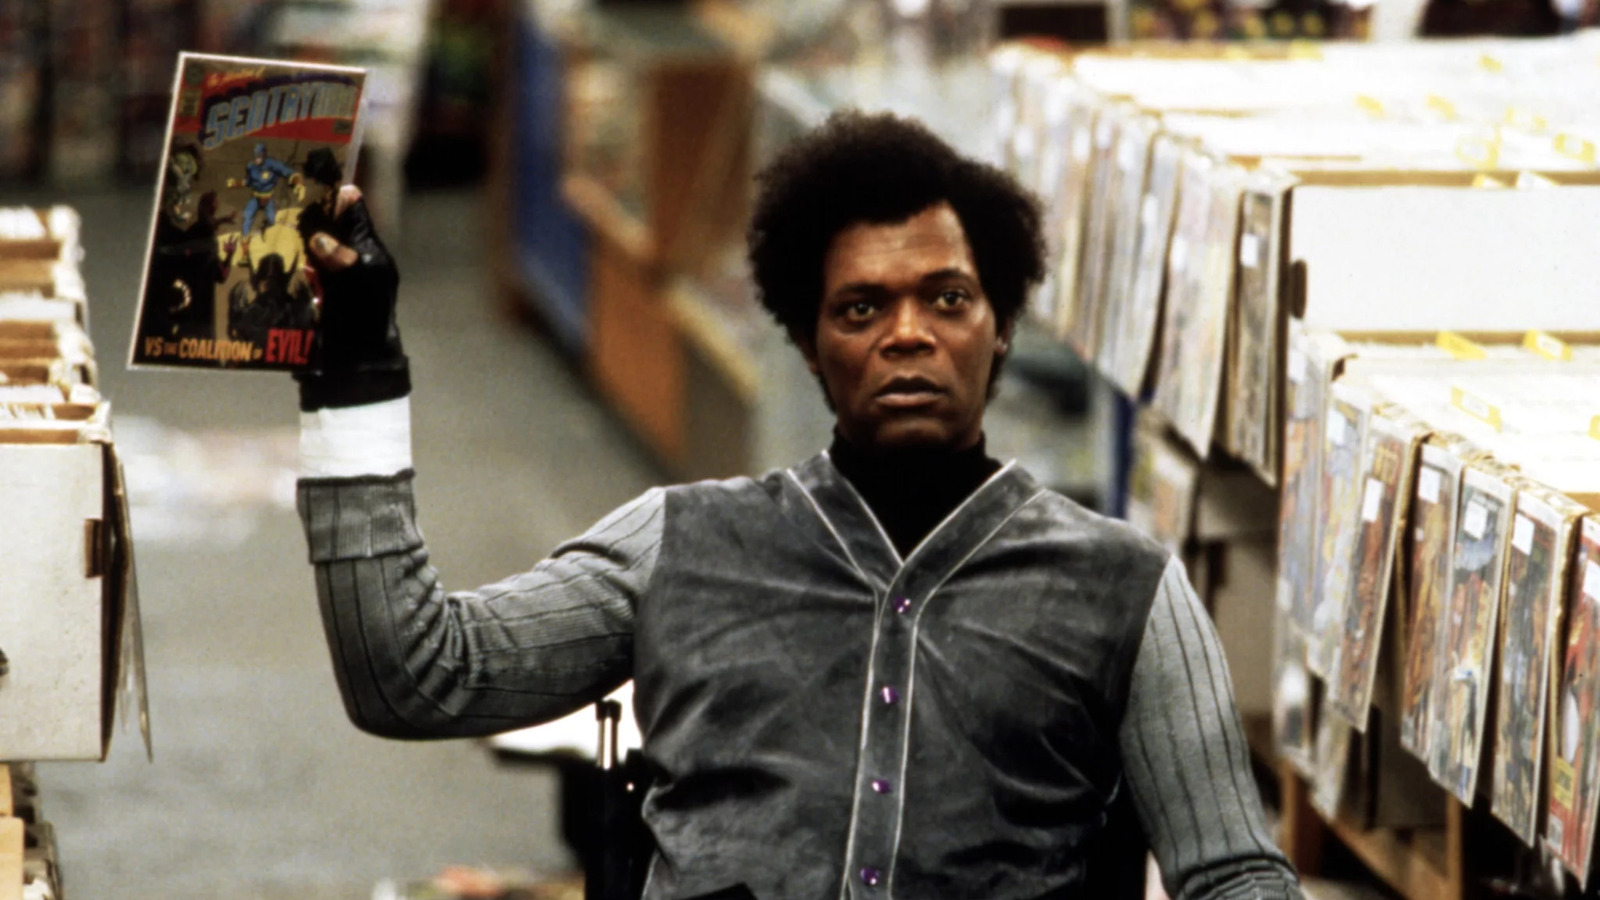 Disney Wasn't Convinced M. Night Shyamalan's Unbreakable Would Appeal To Audiences